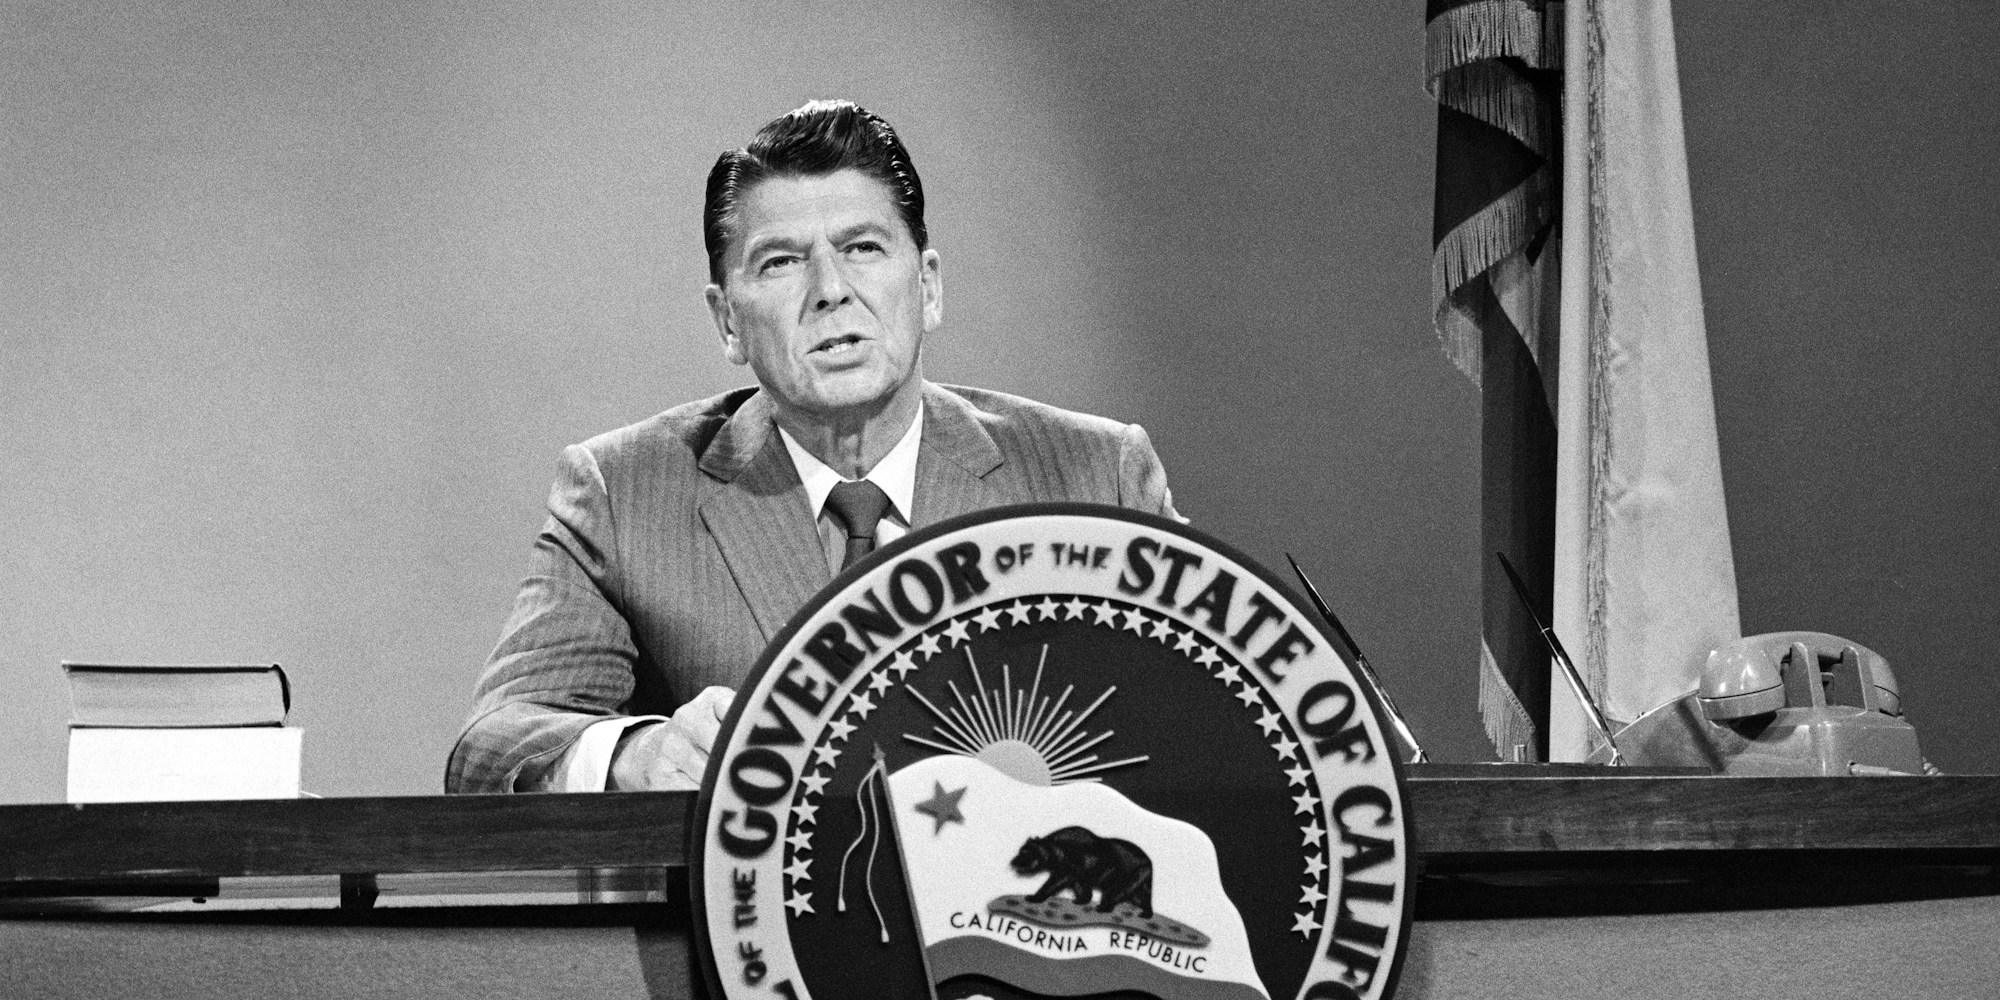 (Original Caption) Sacramento: Gov. Ronald Reagan explains his requested shutdown of California's higher education system in the wake of threatened anti-war violence on statewide television. Reagan said he took action after learning "that deliberate violence and disruptions planned for a number of institutions" in California.